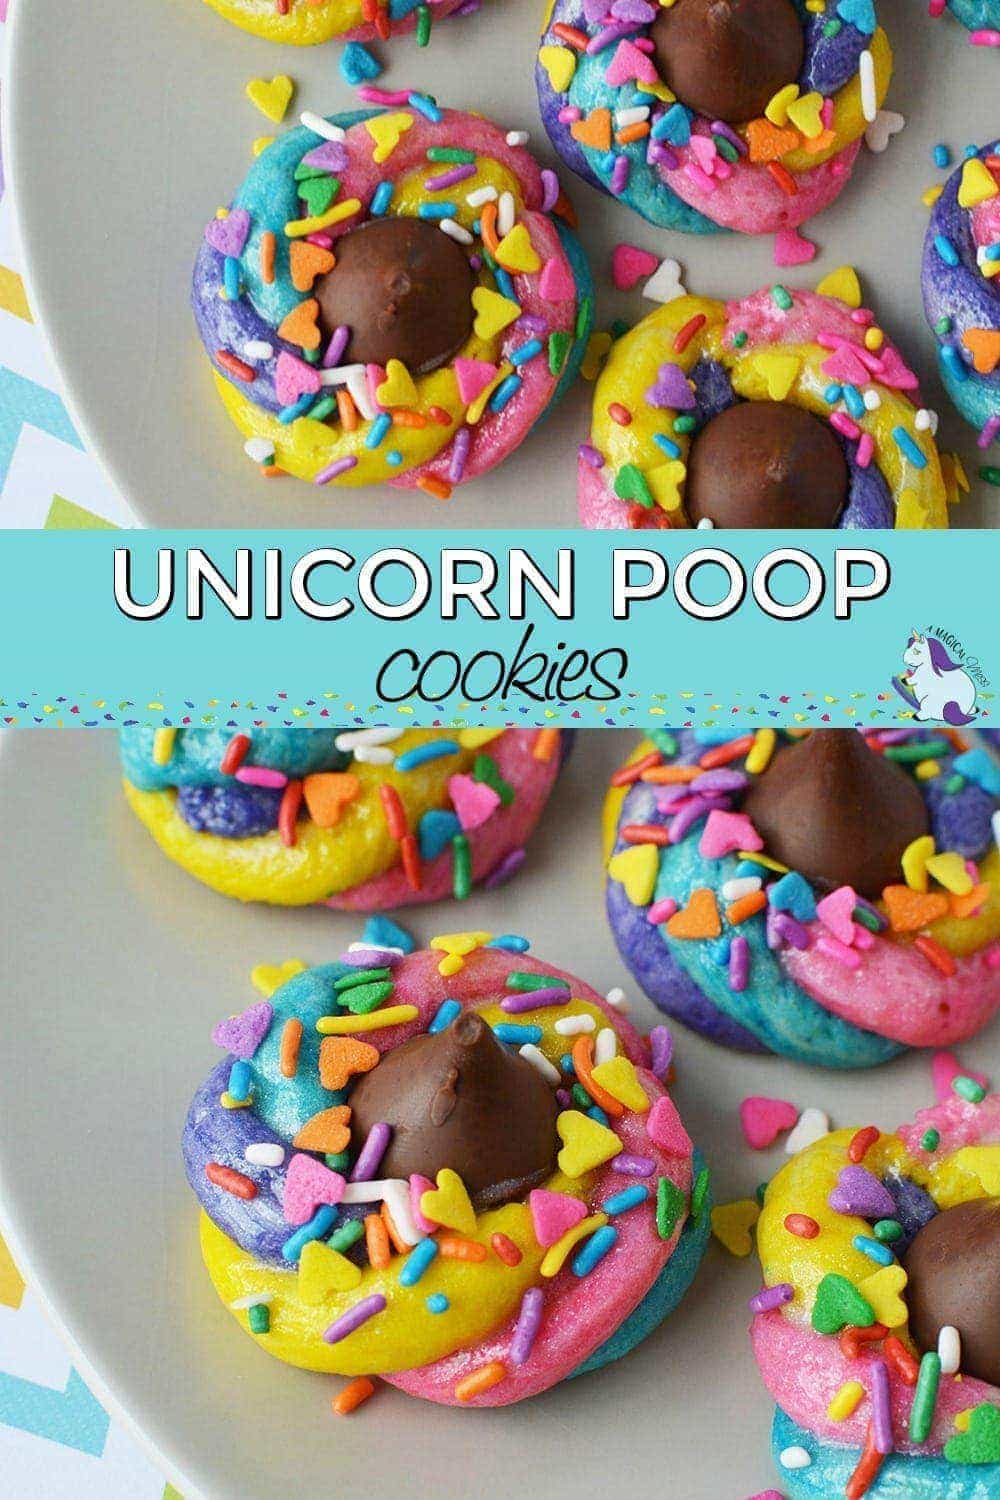 Unicorn poop cookies on a plate collage 